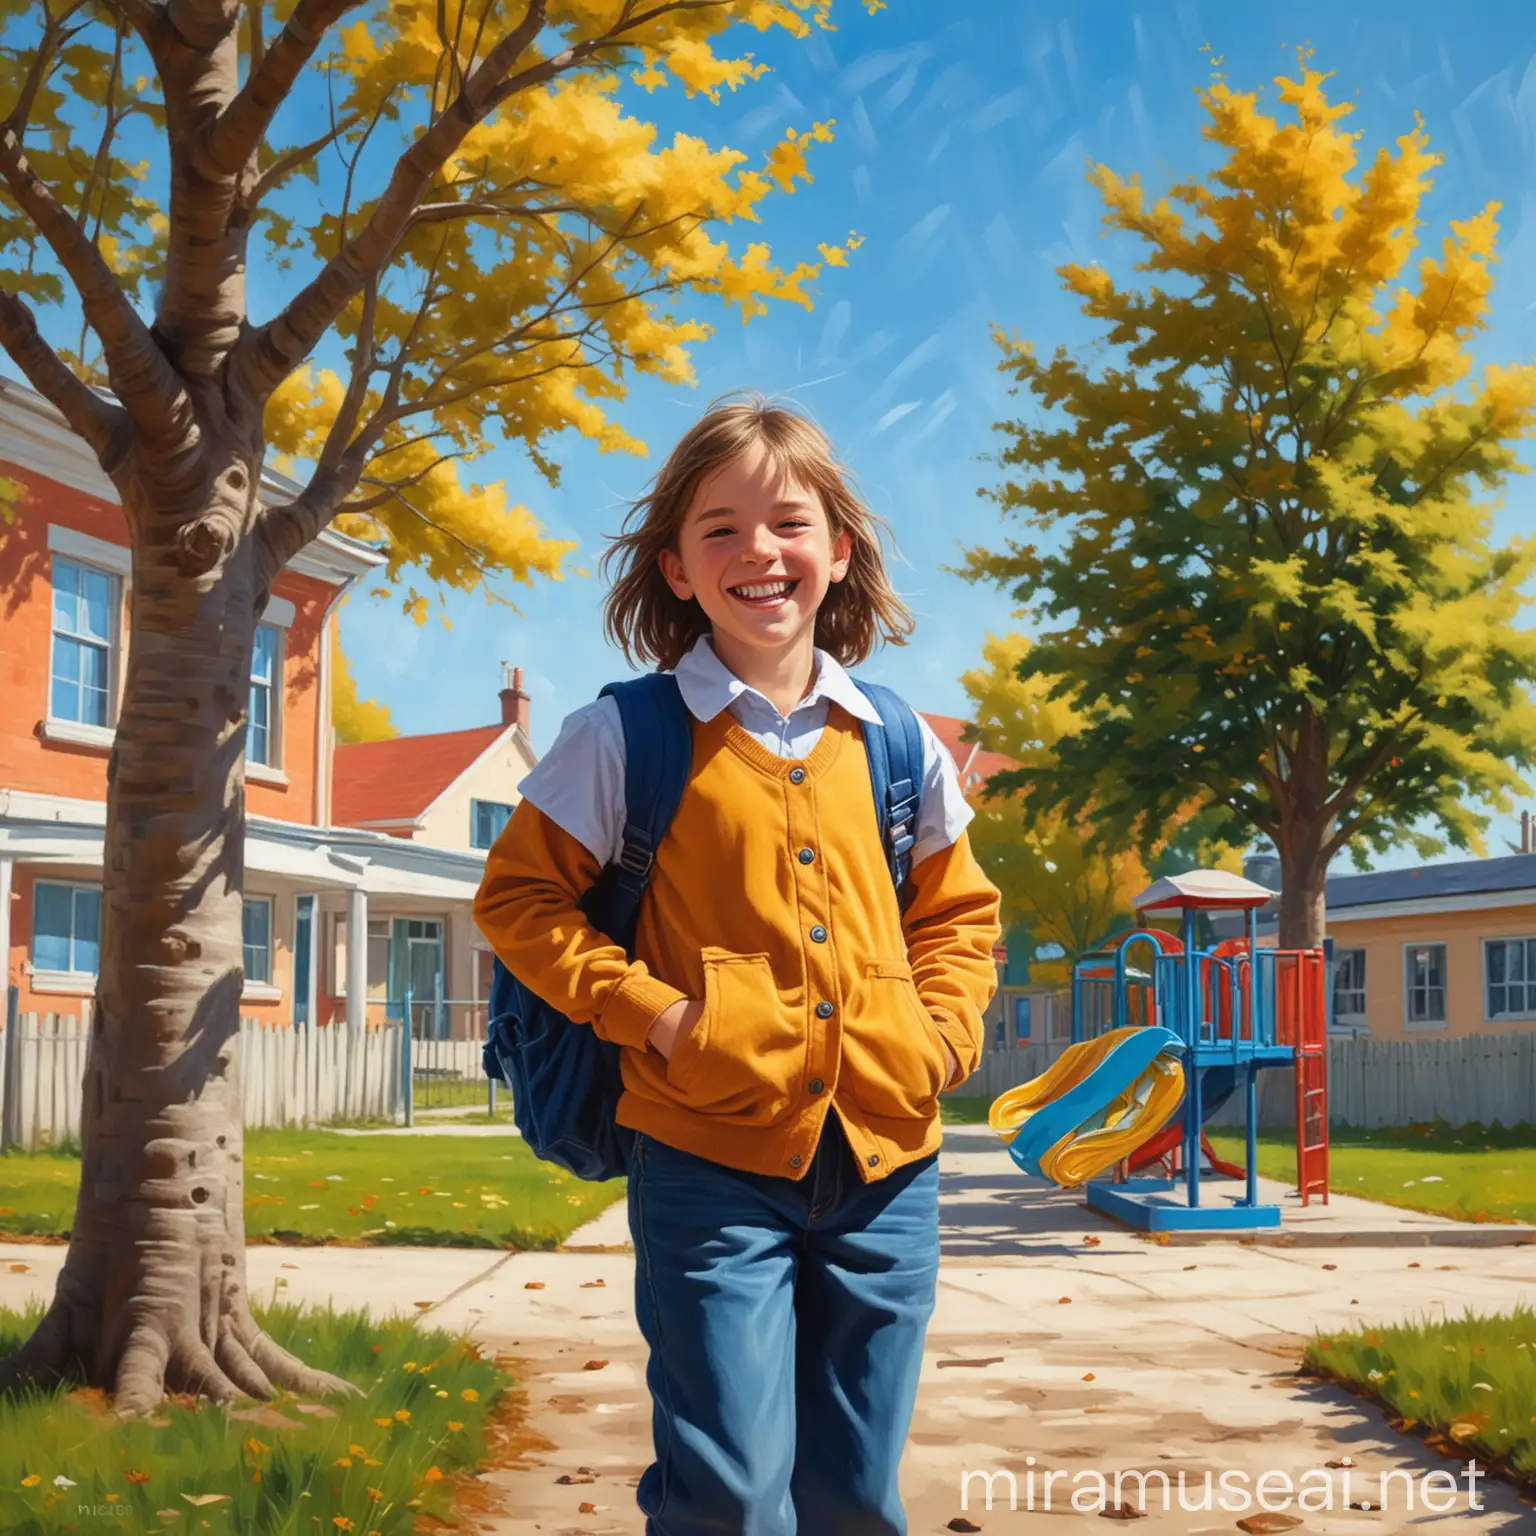 Cheerful Schoolyard Scene with Happy Child and Colorful Playground